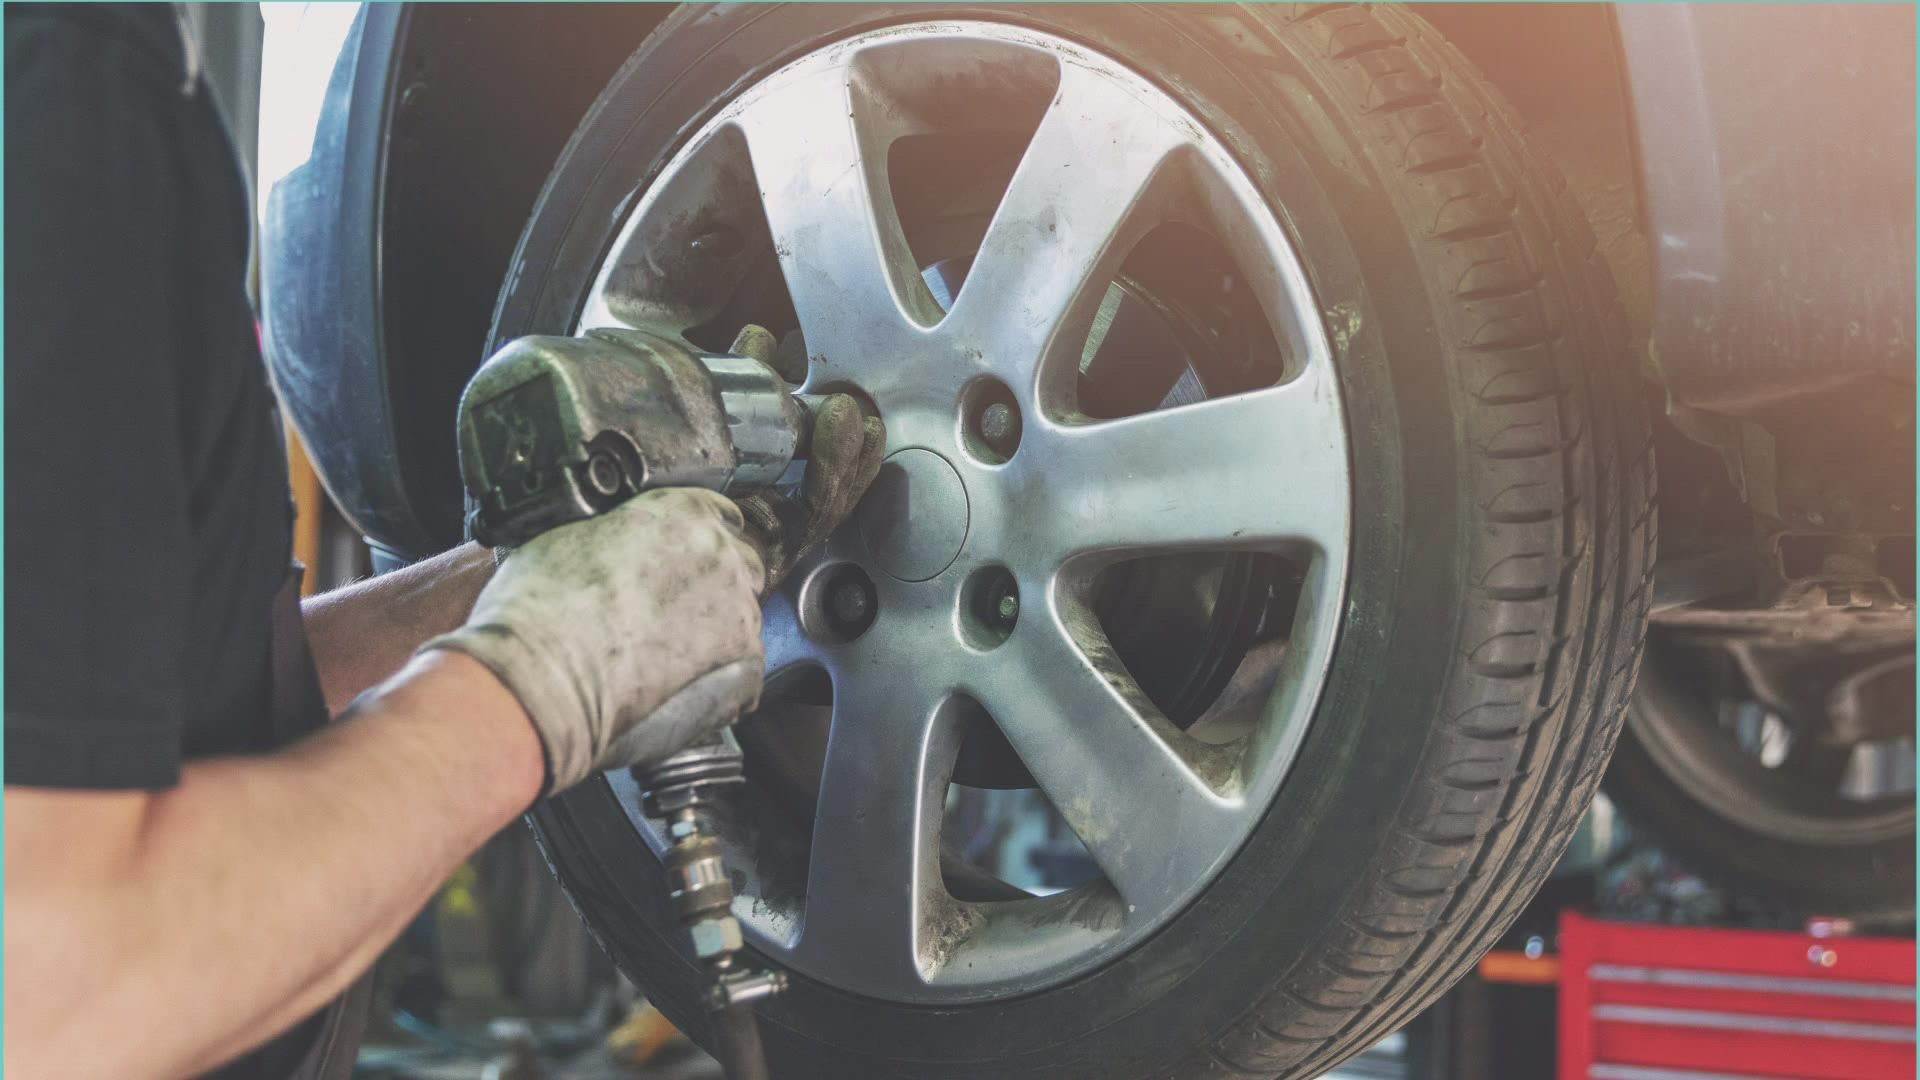 13 ON YOUR SIDE Money Guide: All about car repair insurance.